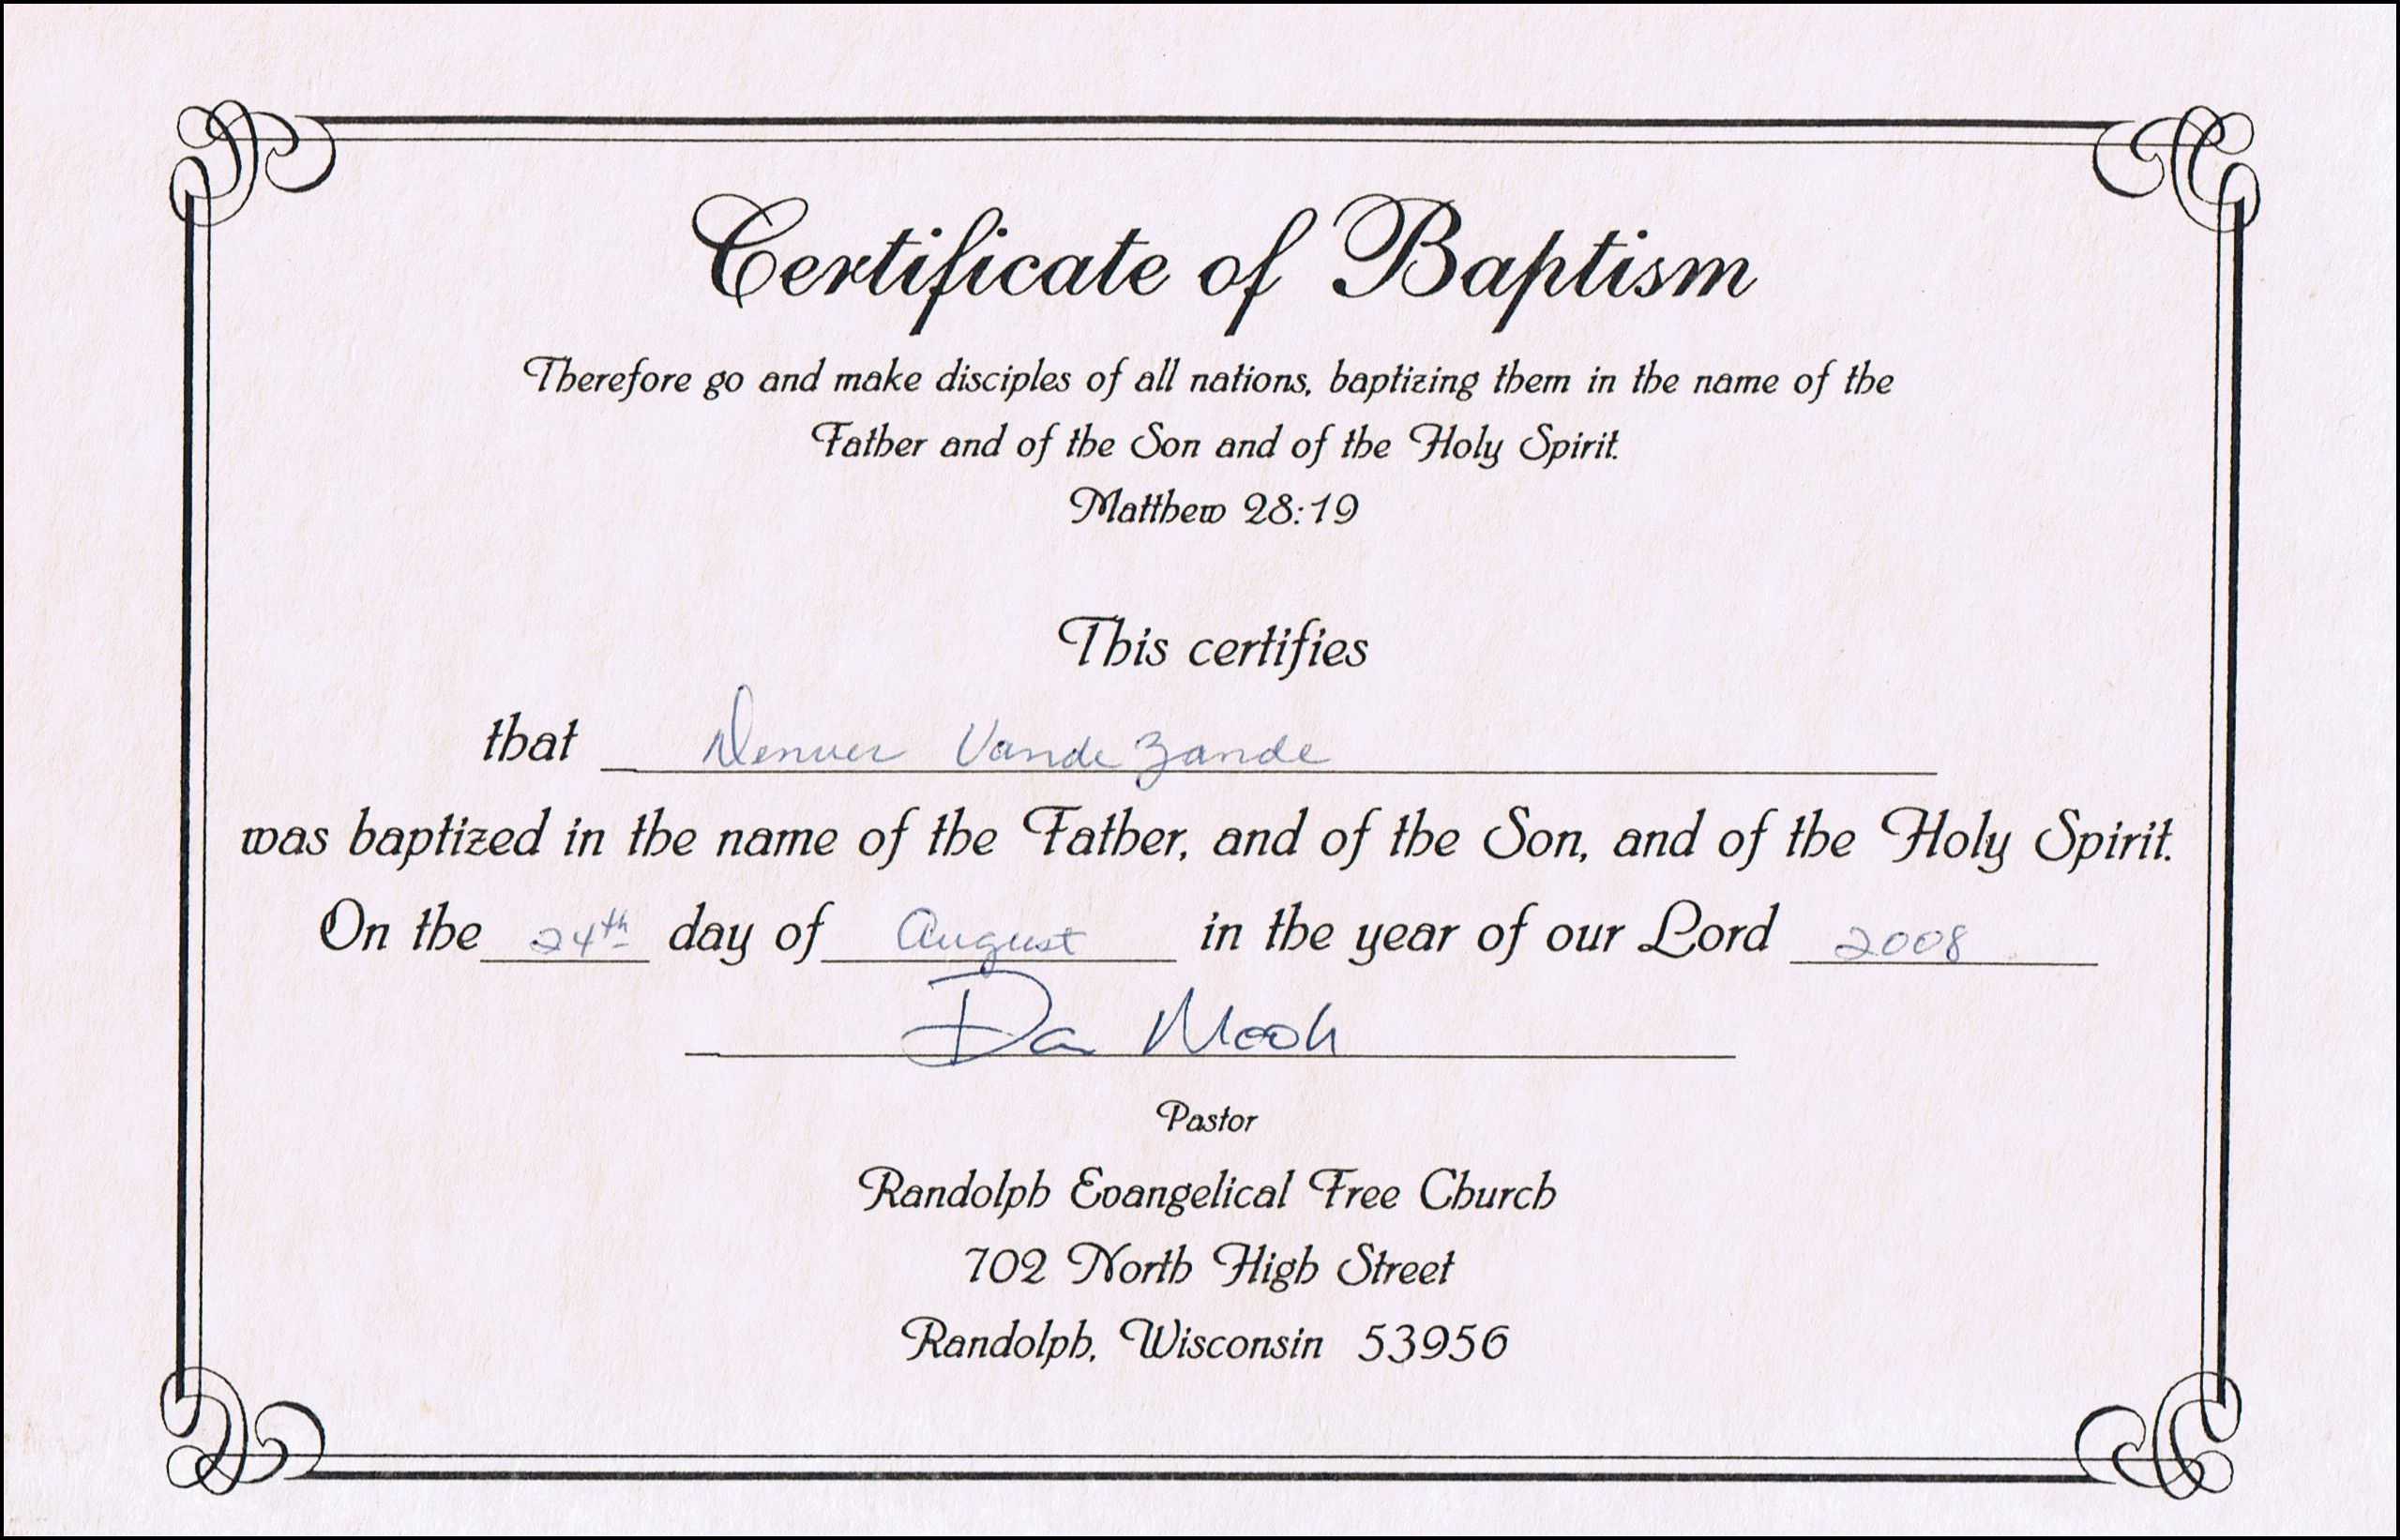 Baptism Certificate Templates For Word | Aspects Of Beauty Within Baptism Certificate Template Download